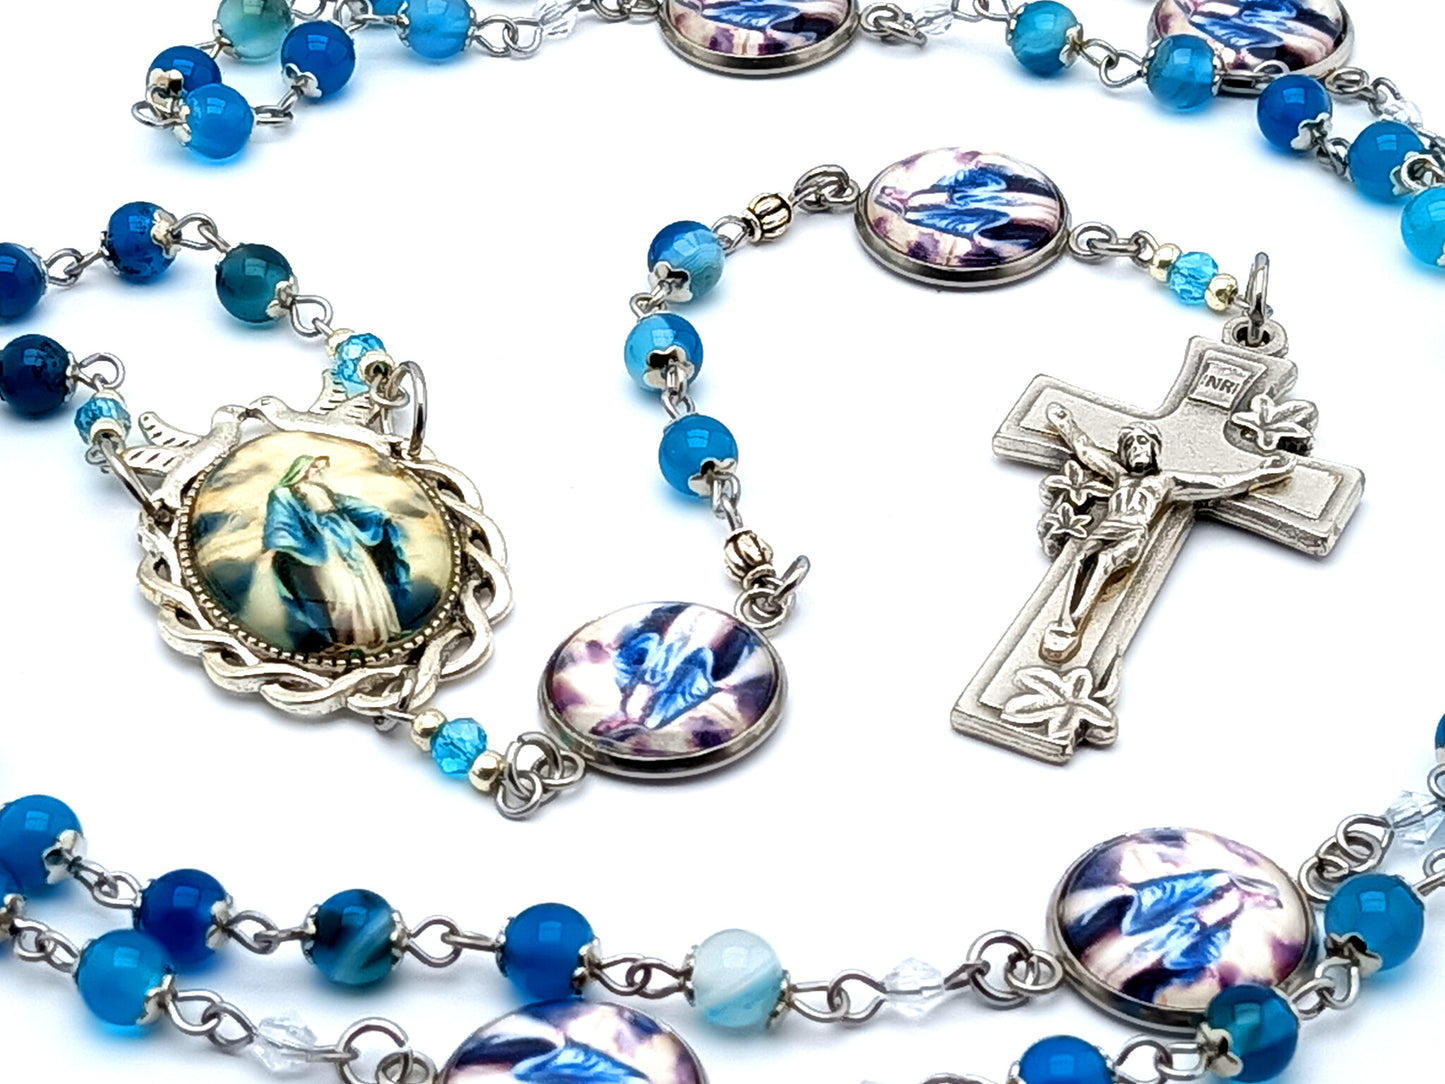 Our Lady of Grace unique rosary beads with agate gemstone  beads and Holy Spirit picture medal and lily of the valley crucifix.